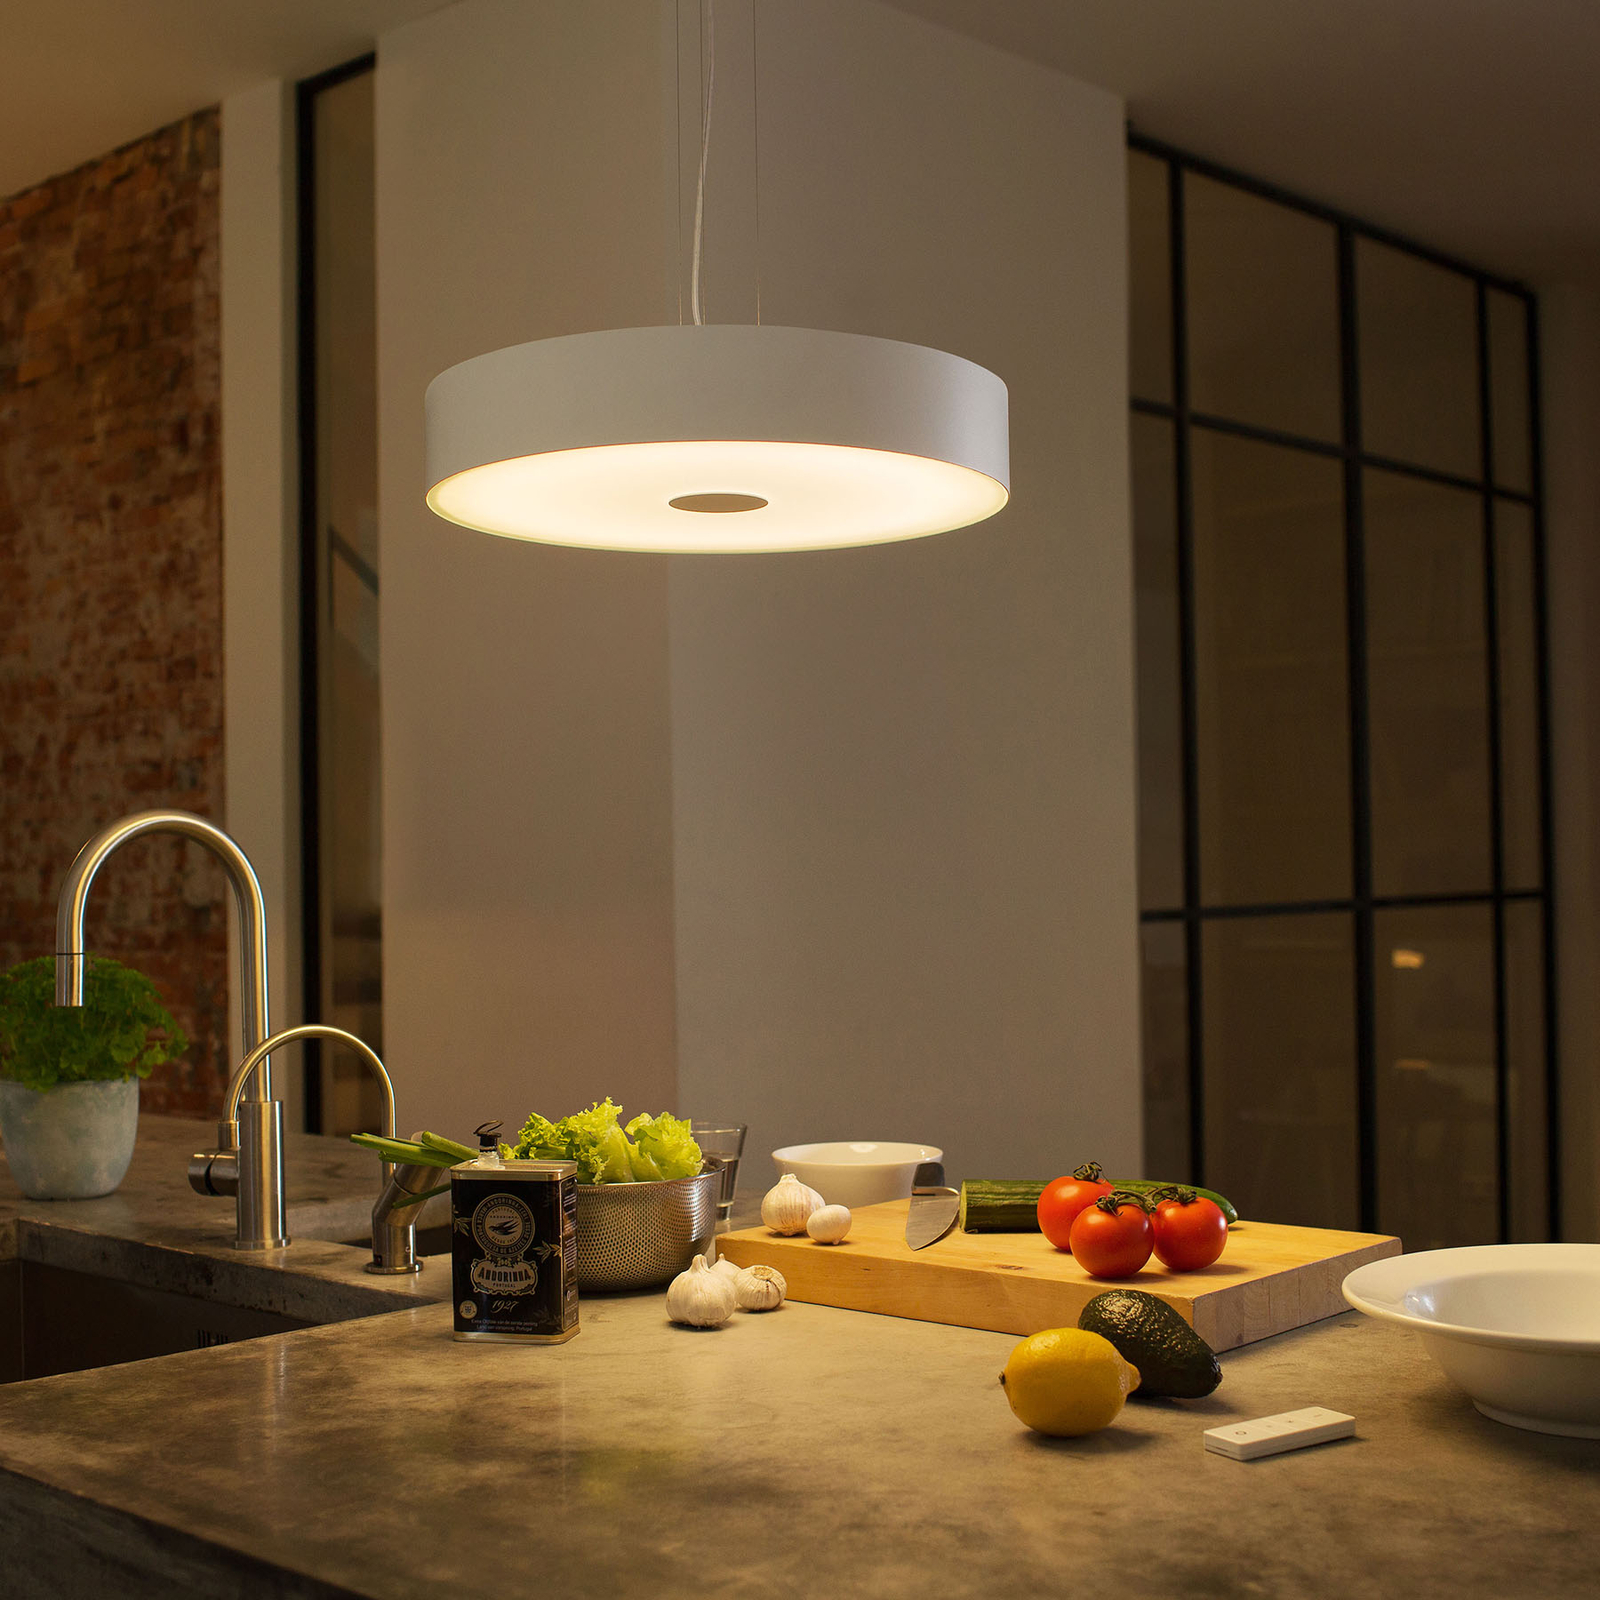 Philips Hue Ambiance Fair hanglamp wit | Lampen24.nl